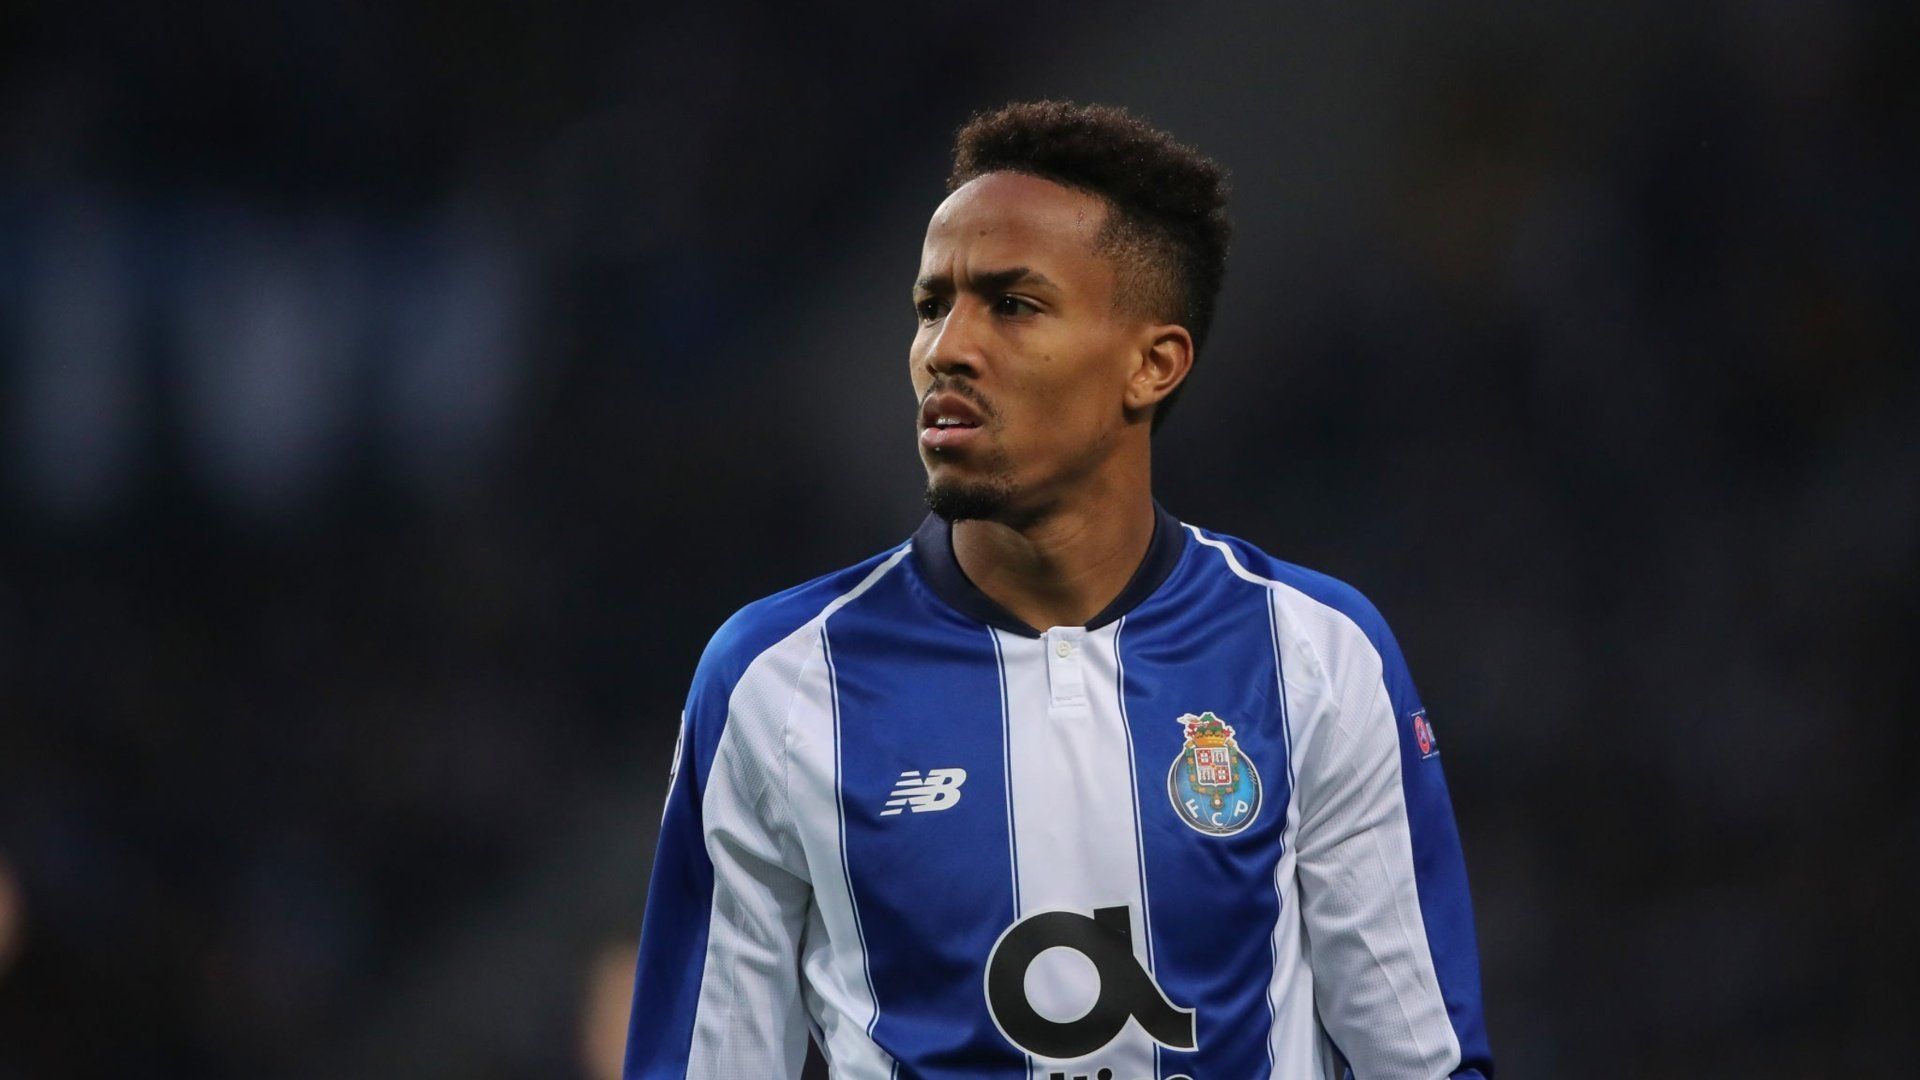 Confirmed: Éder Militão will be presented on Wednesday